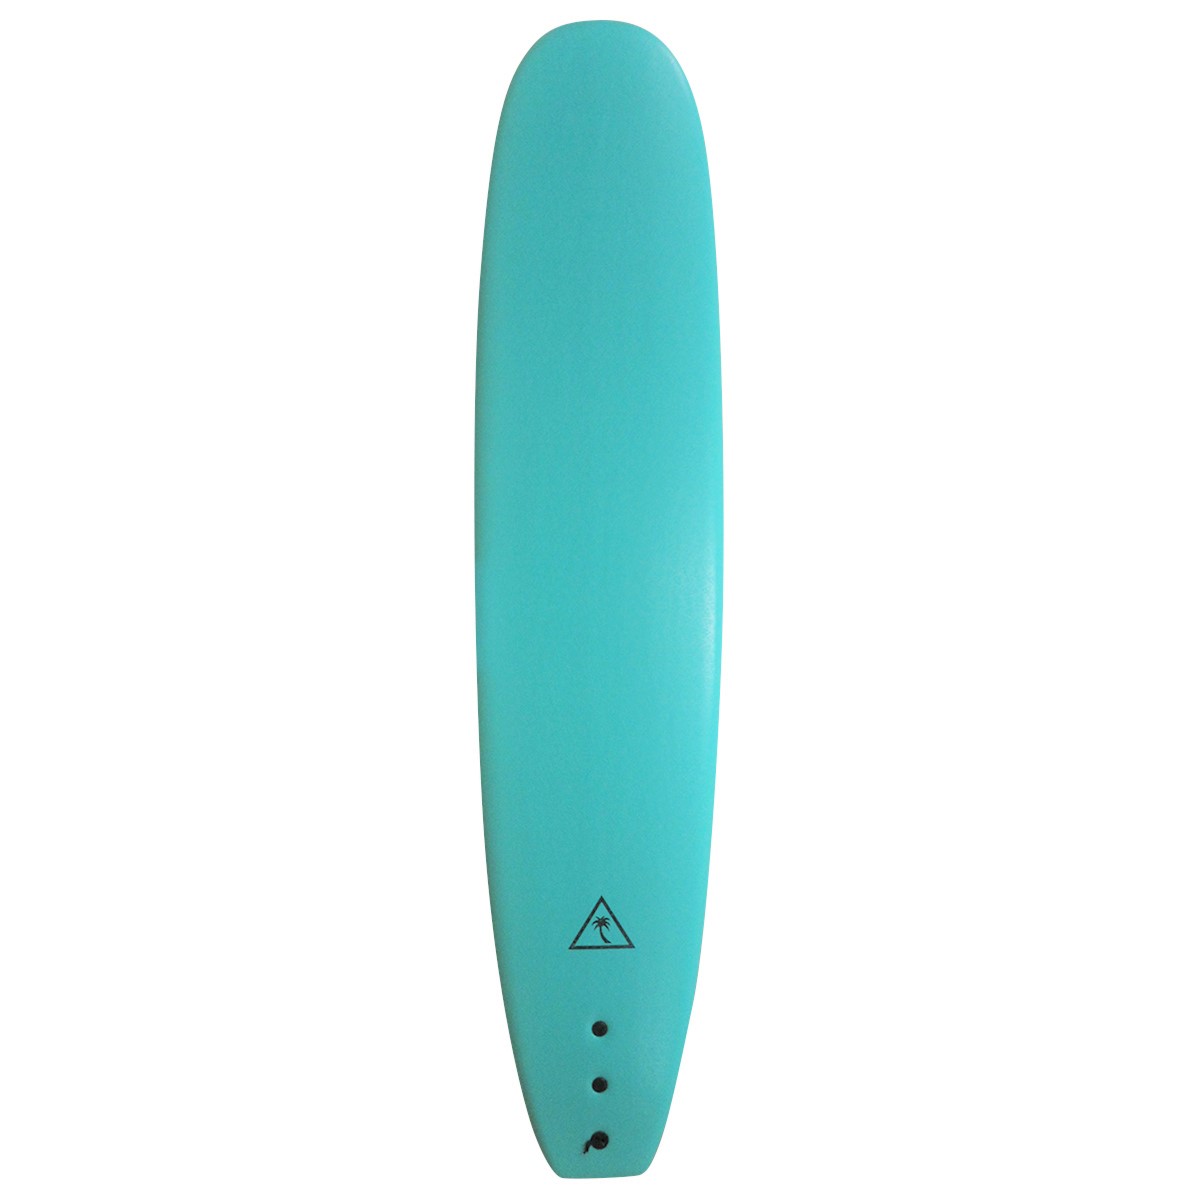 CATCH SURF / HERITAGE 8`6 NOSERIDER SINGLE FIN